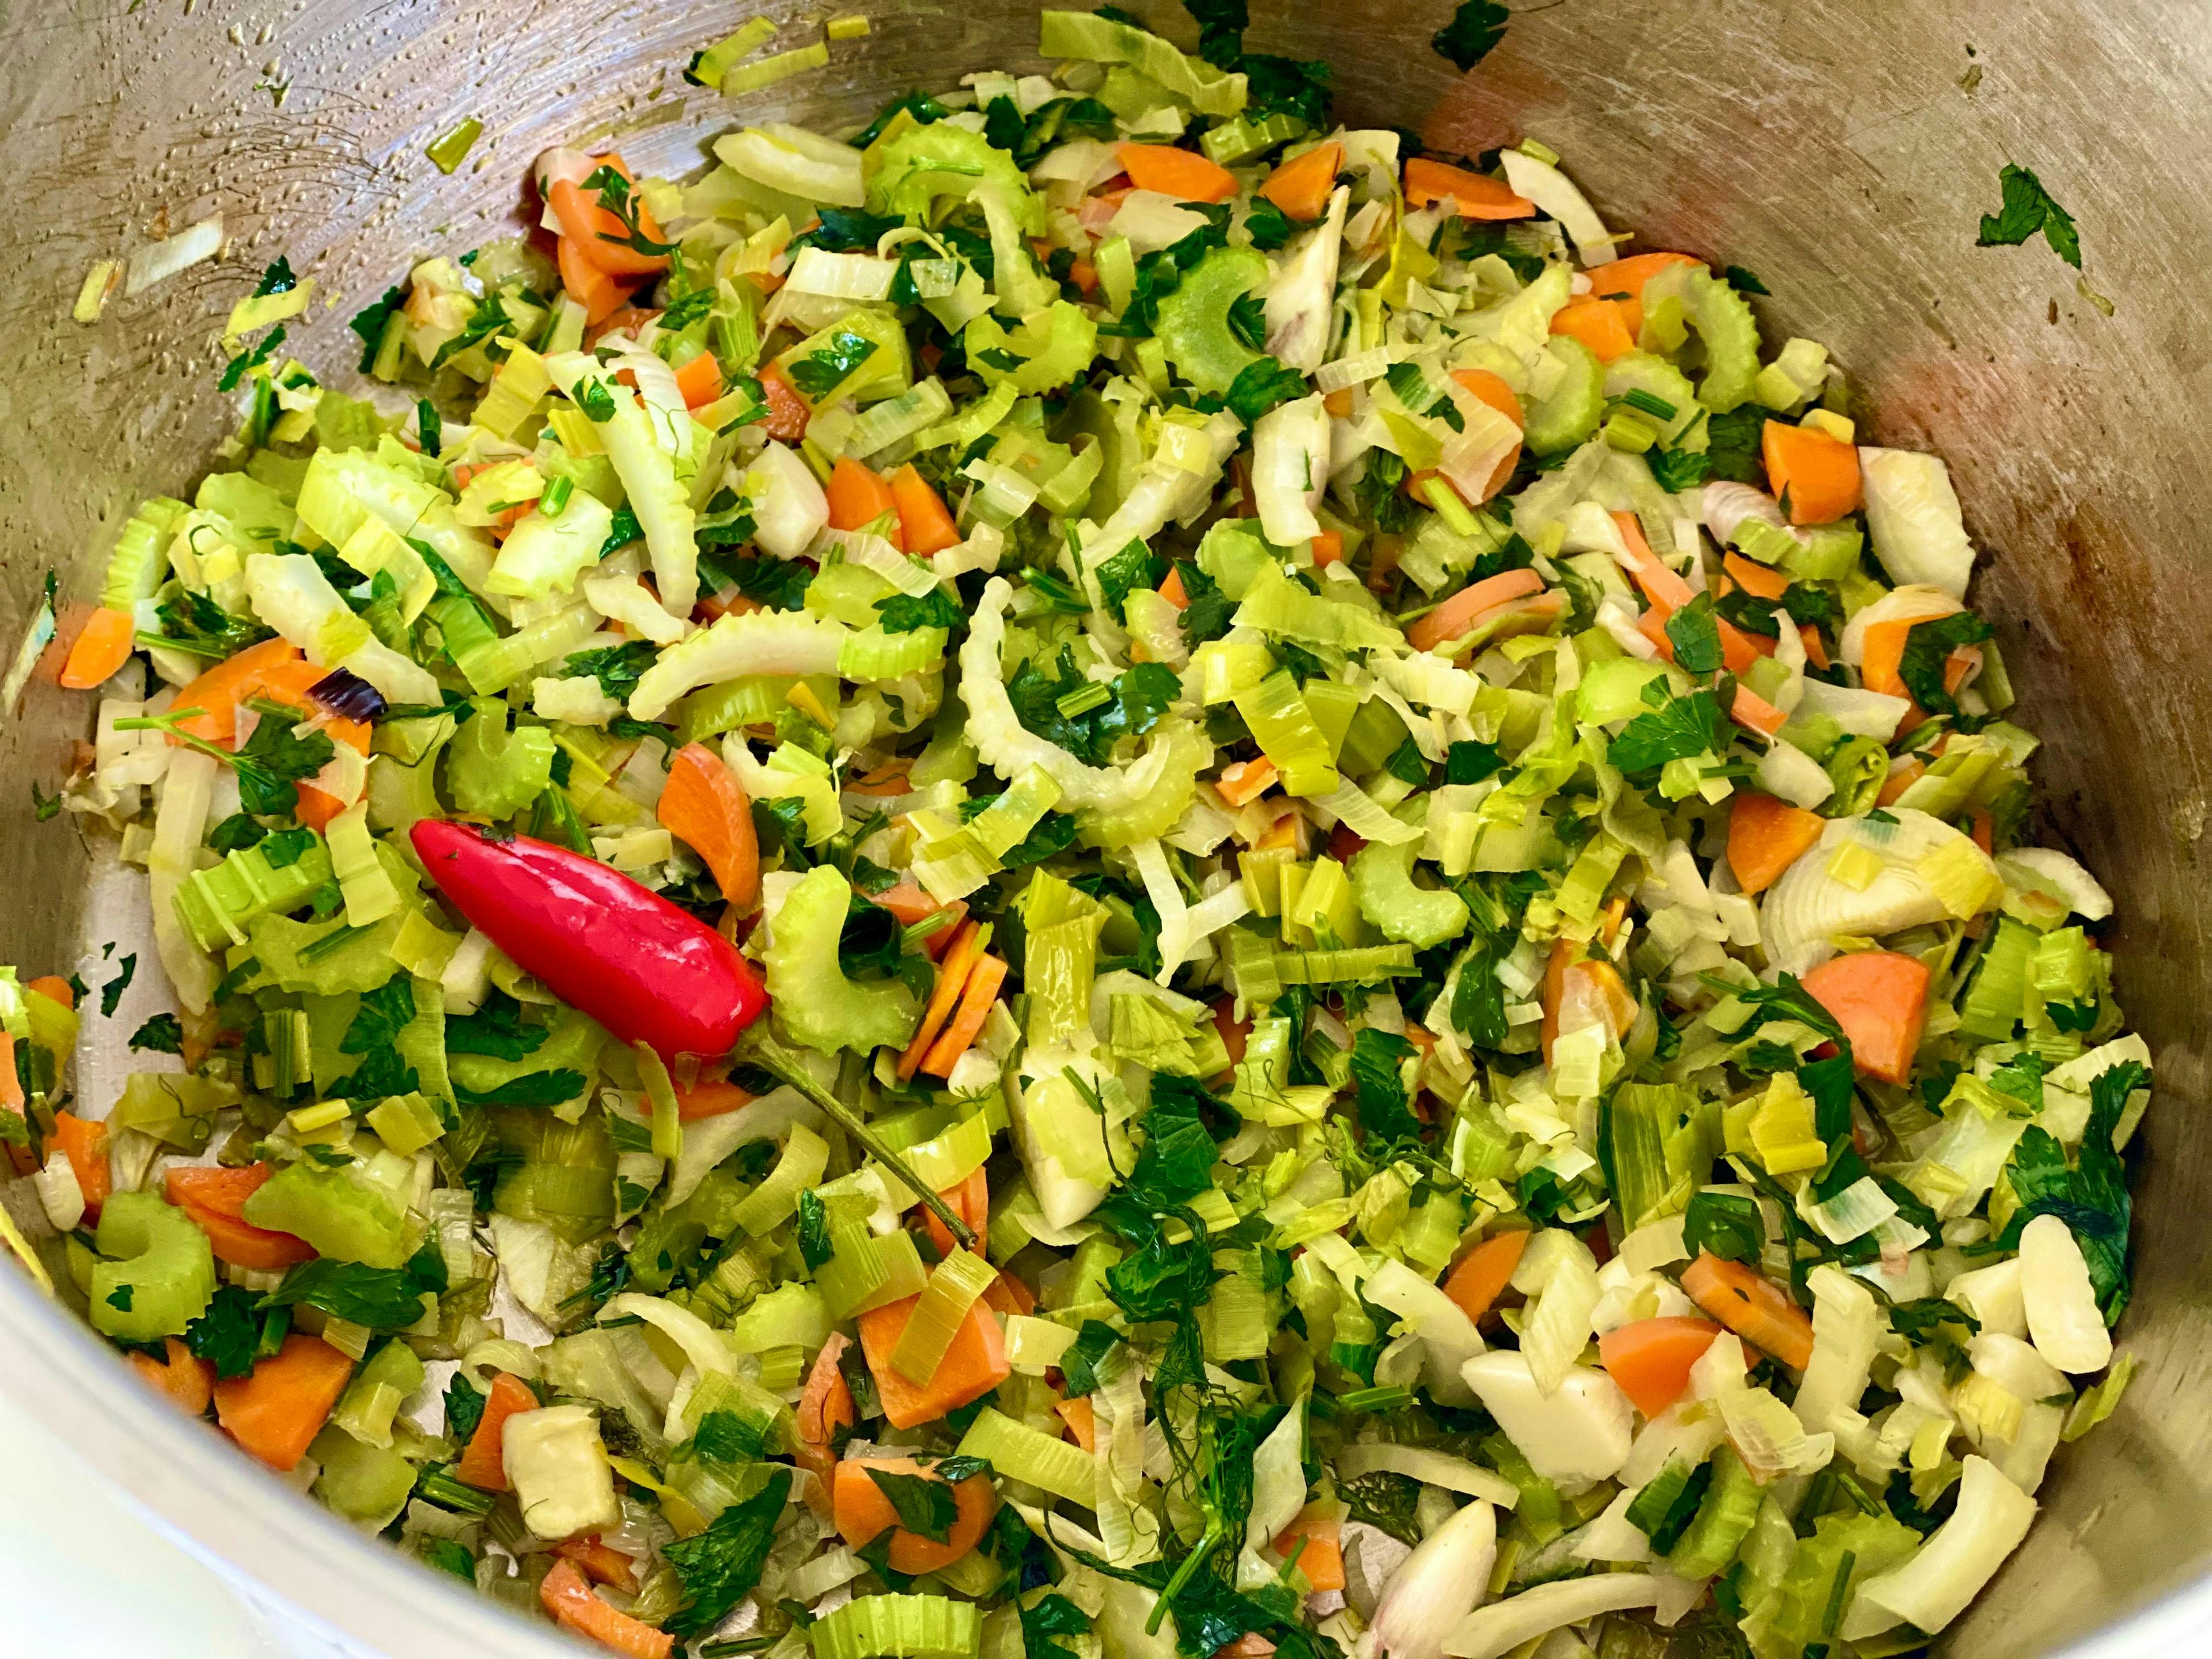 chopped vegetables and chilli in saucepan